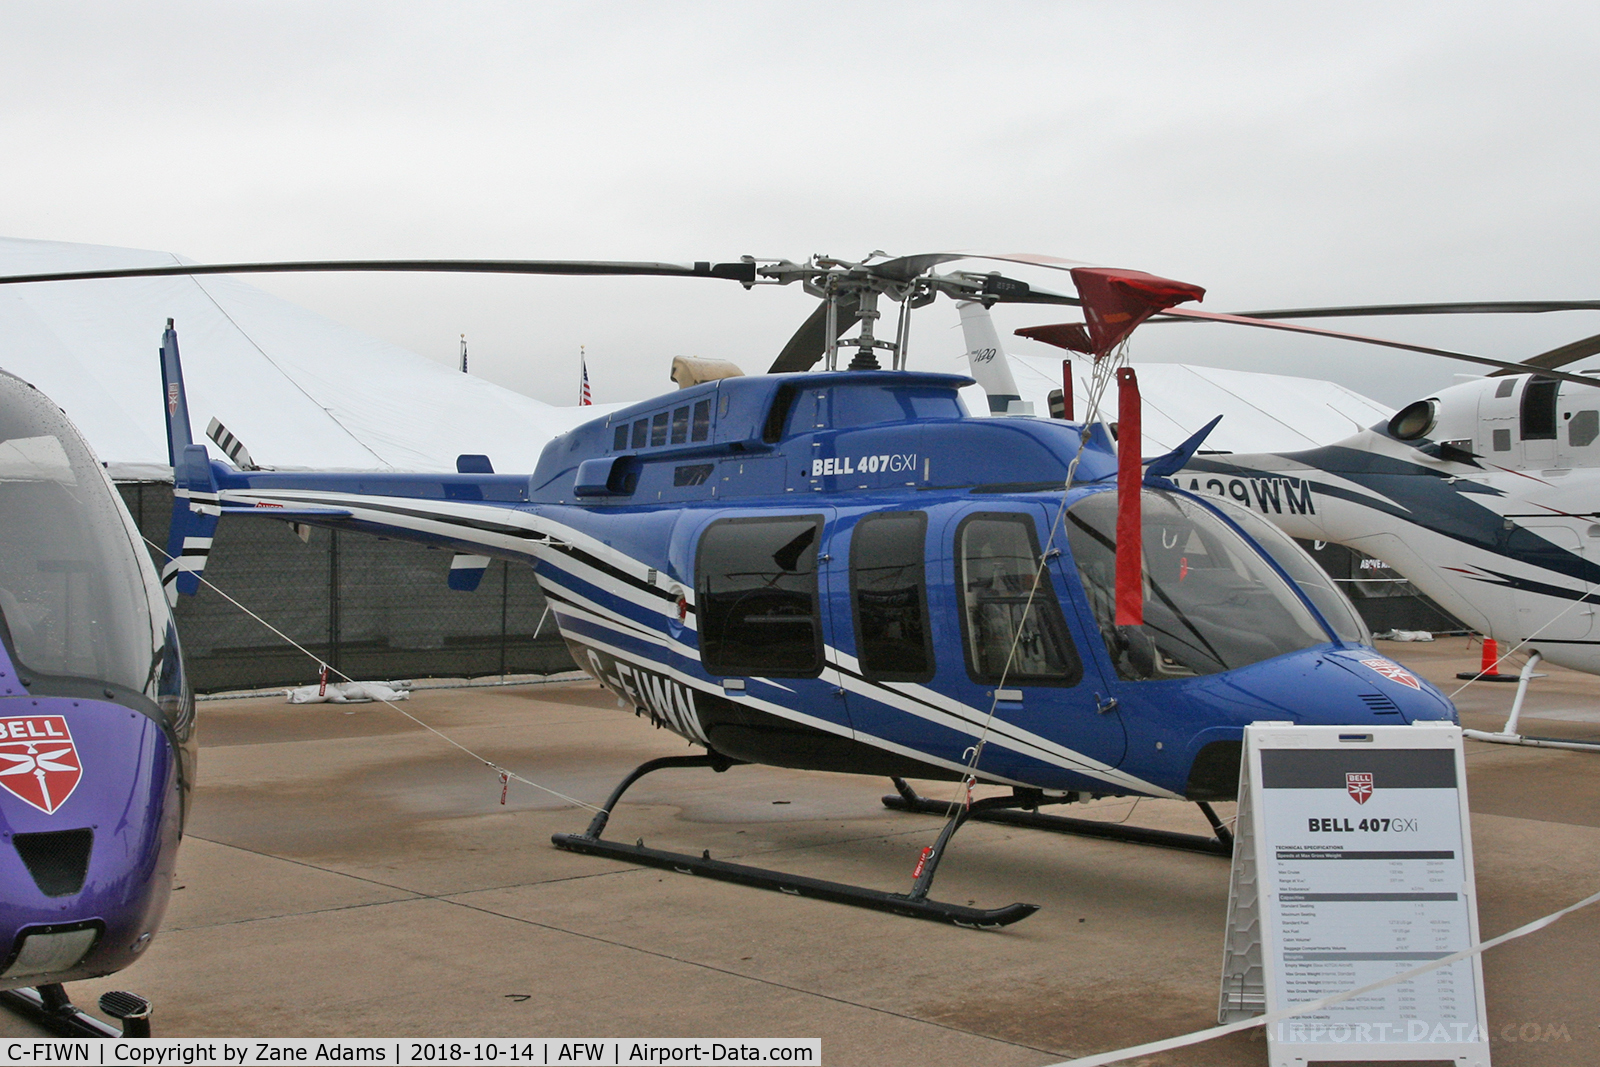 C-FIWN, 2014 Bell 407 C/N 54567, At the 2019 Alliance Airshow